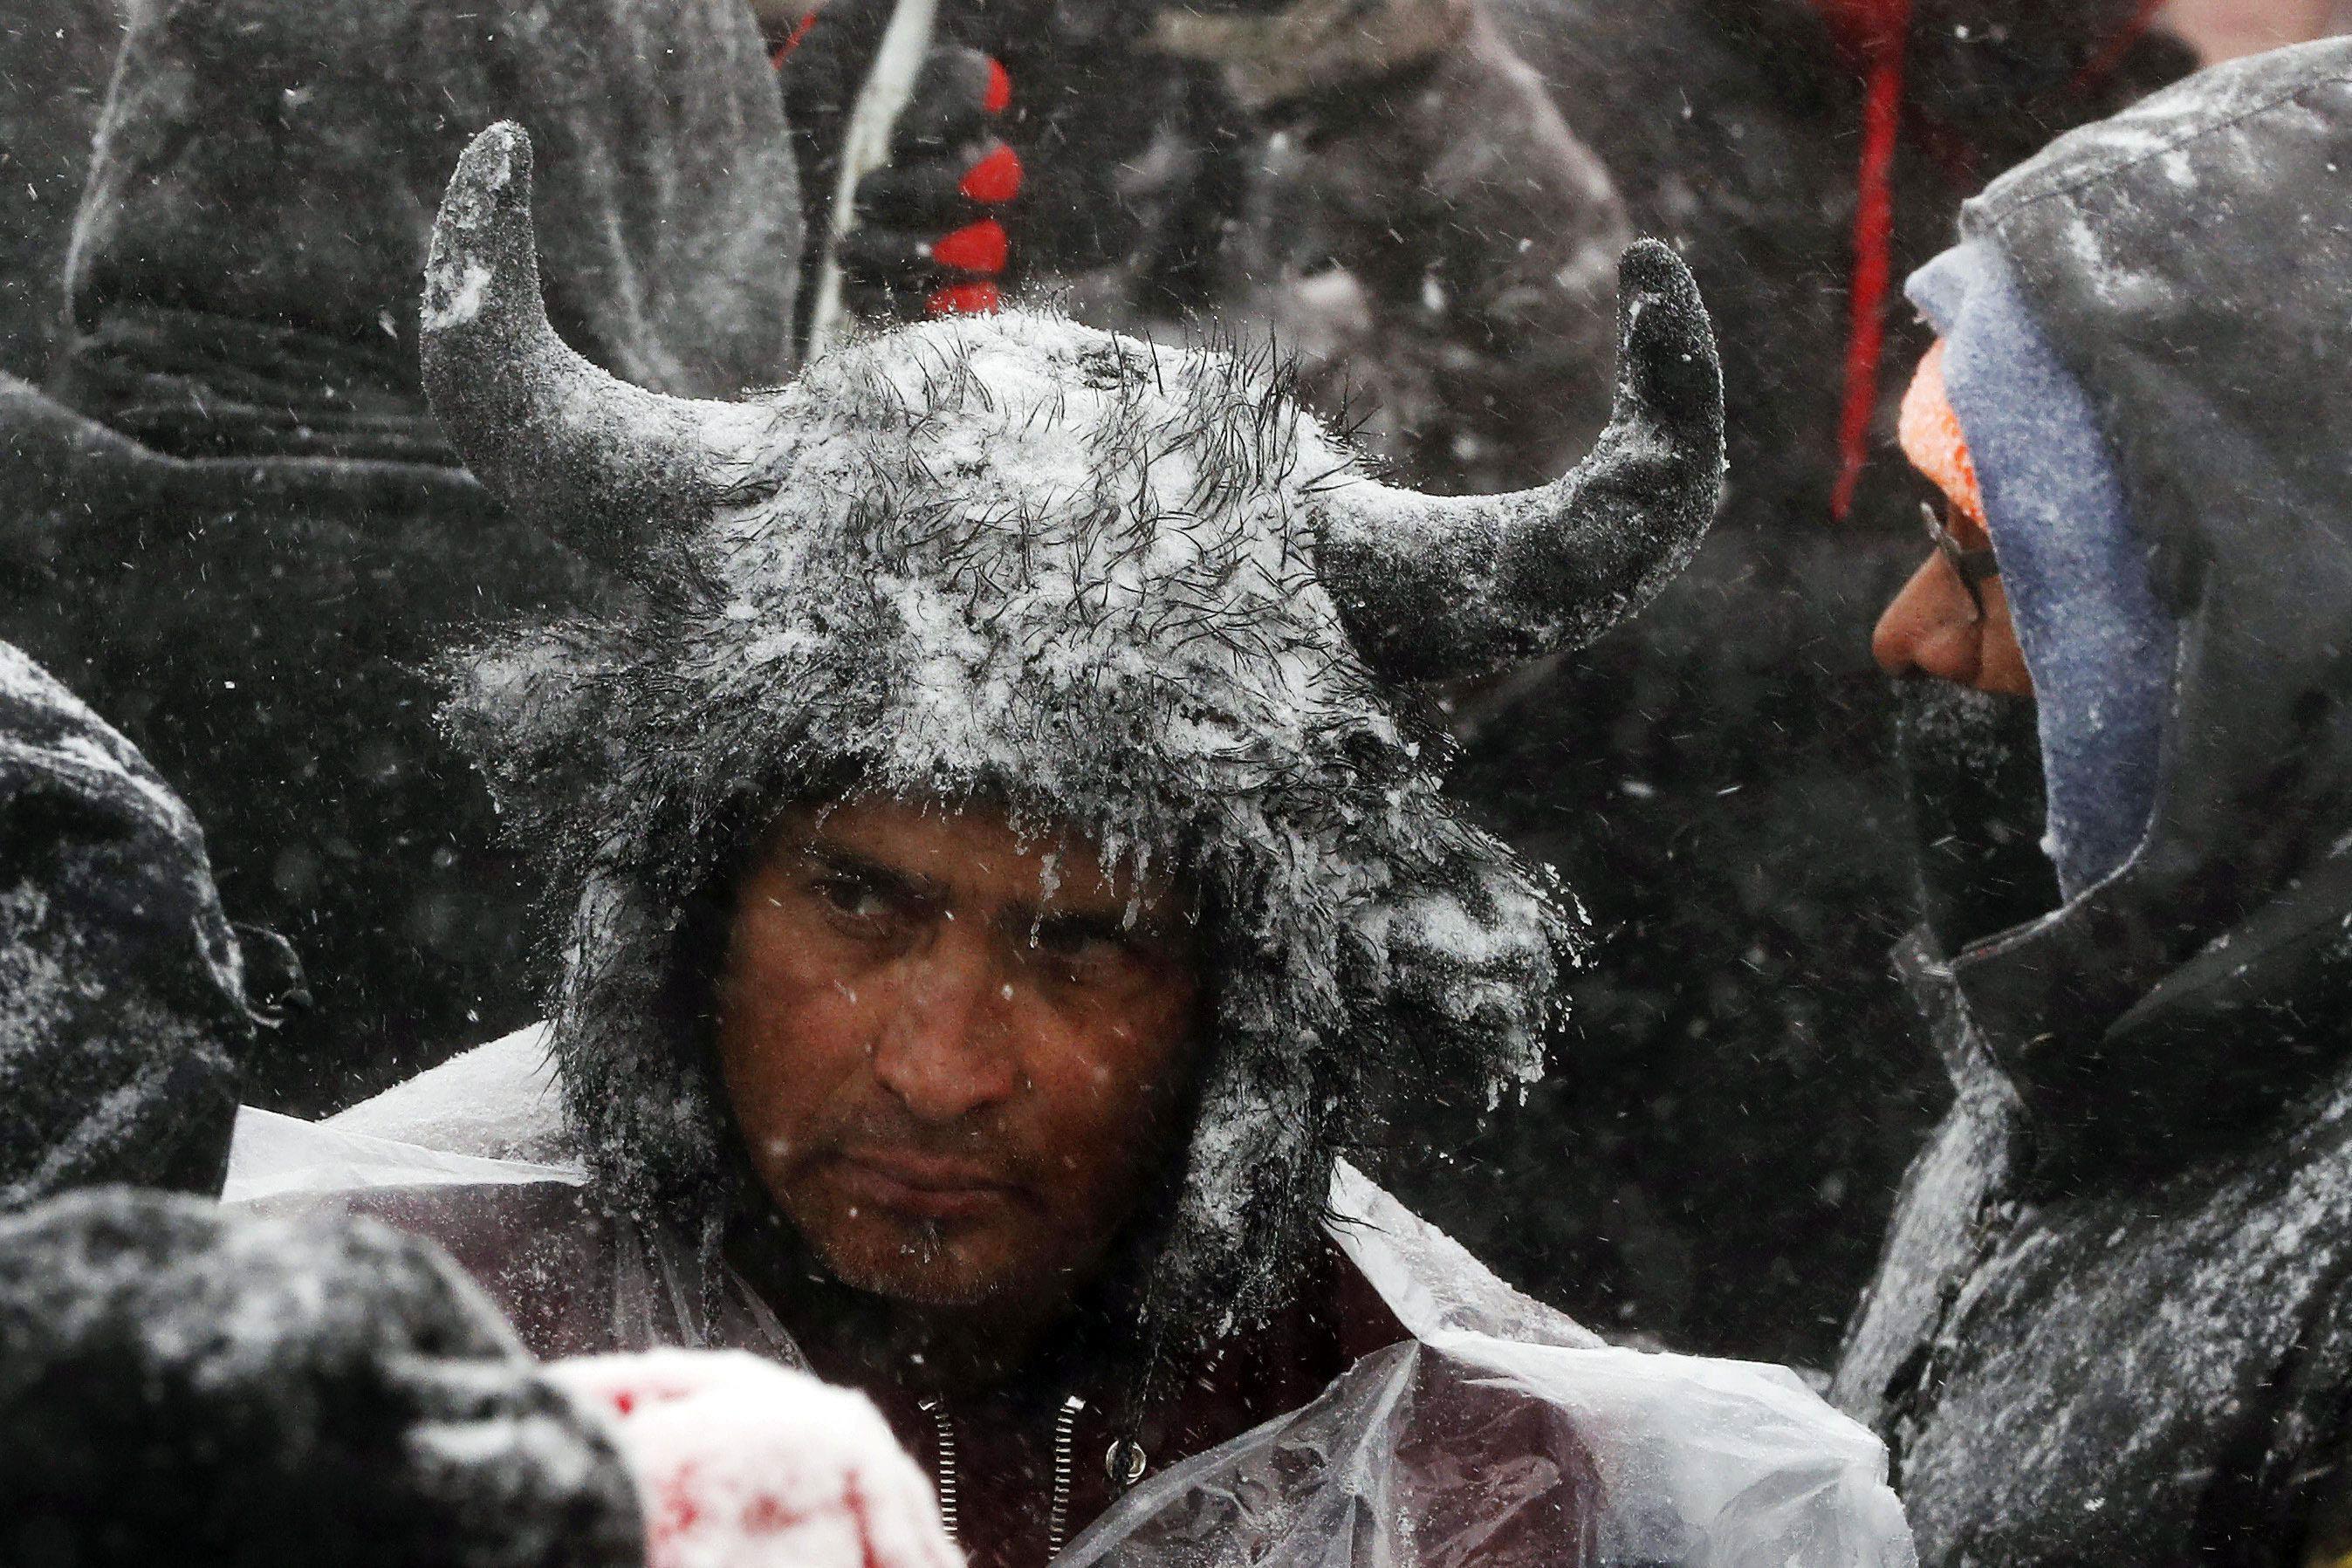 A Native American man stands in the snow during a march with veterans near Backwater Bridge just out